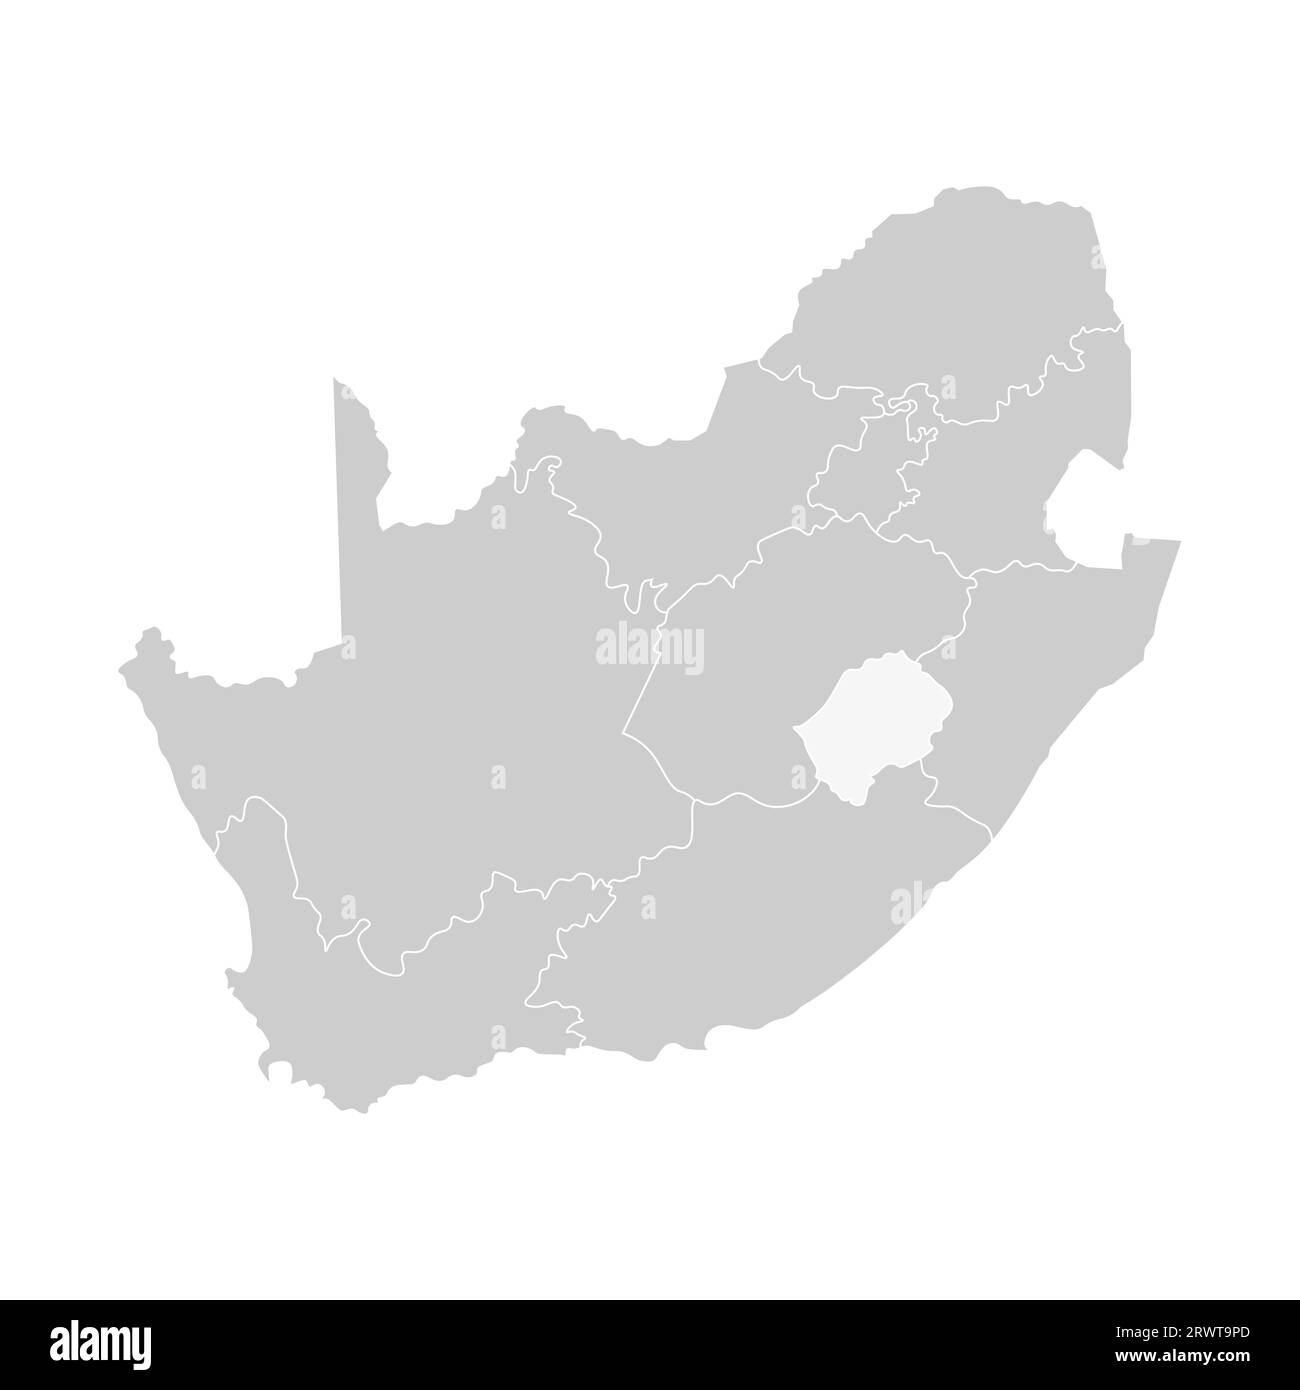 Vector isolated illustration of simplified administrative map of South Africa. Borders of the provinces (regions). Grey silhouettes. White outline. Stock Vector